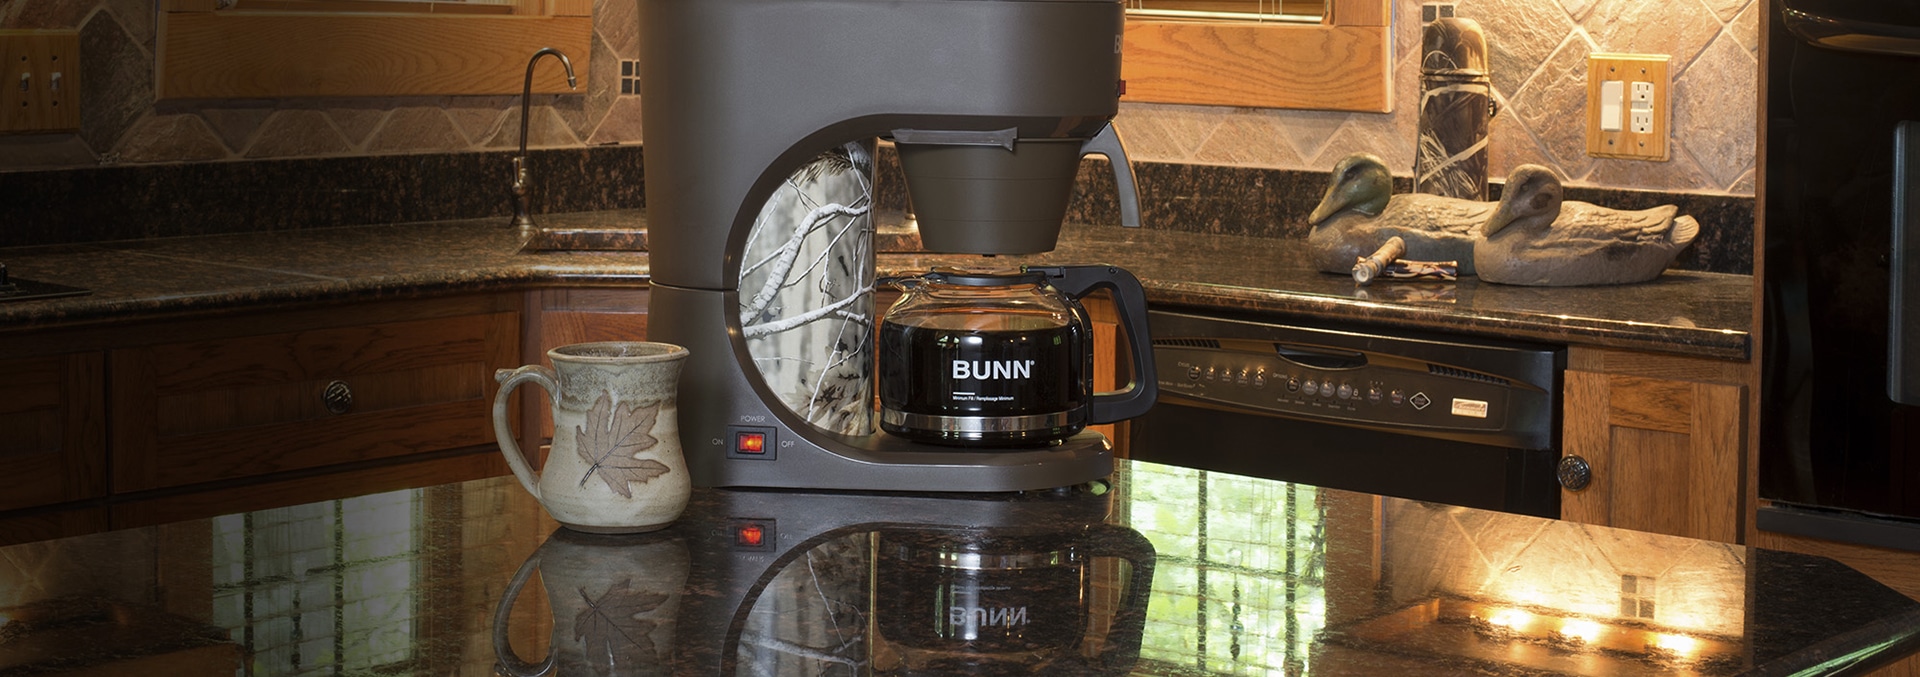 How To Clean BUNN Coffee Makers - Easy And Effective Ways